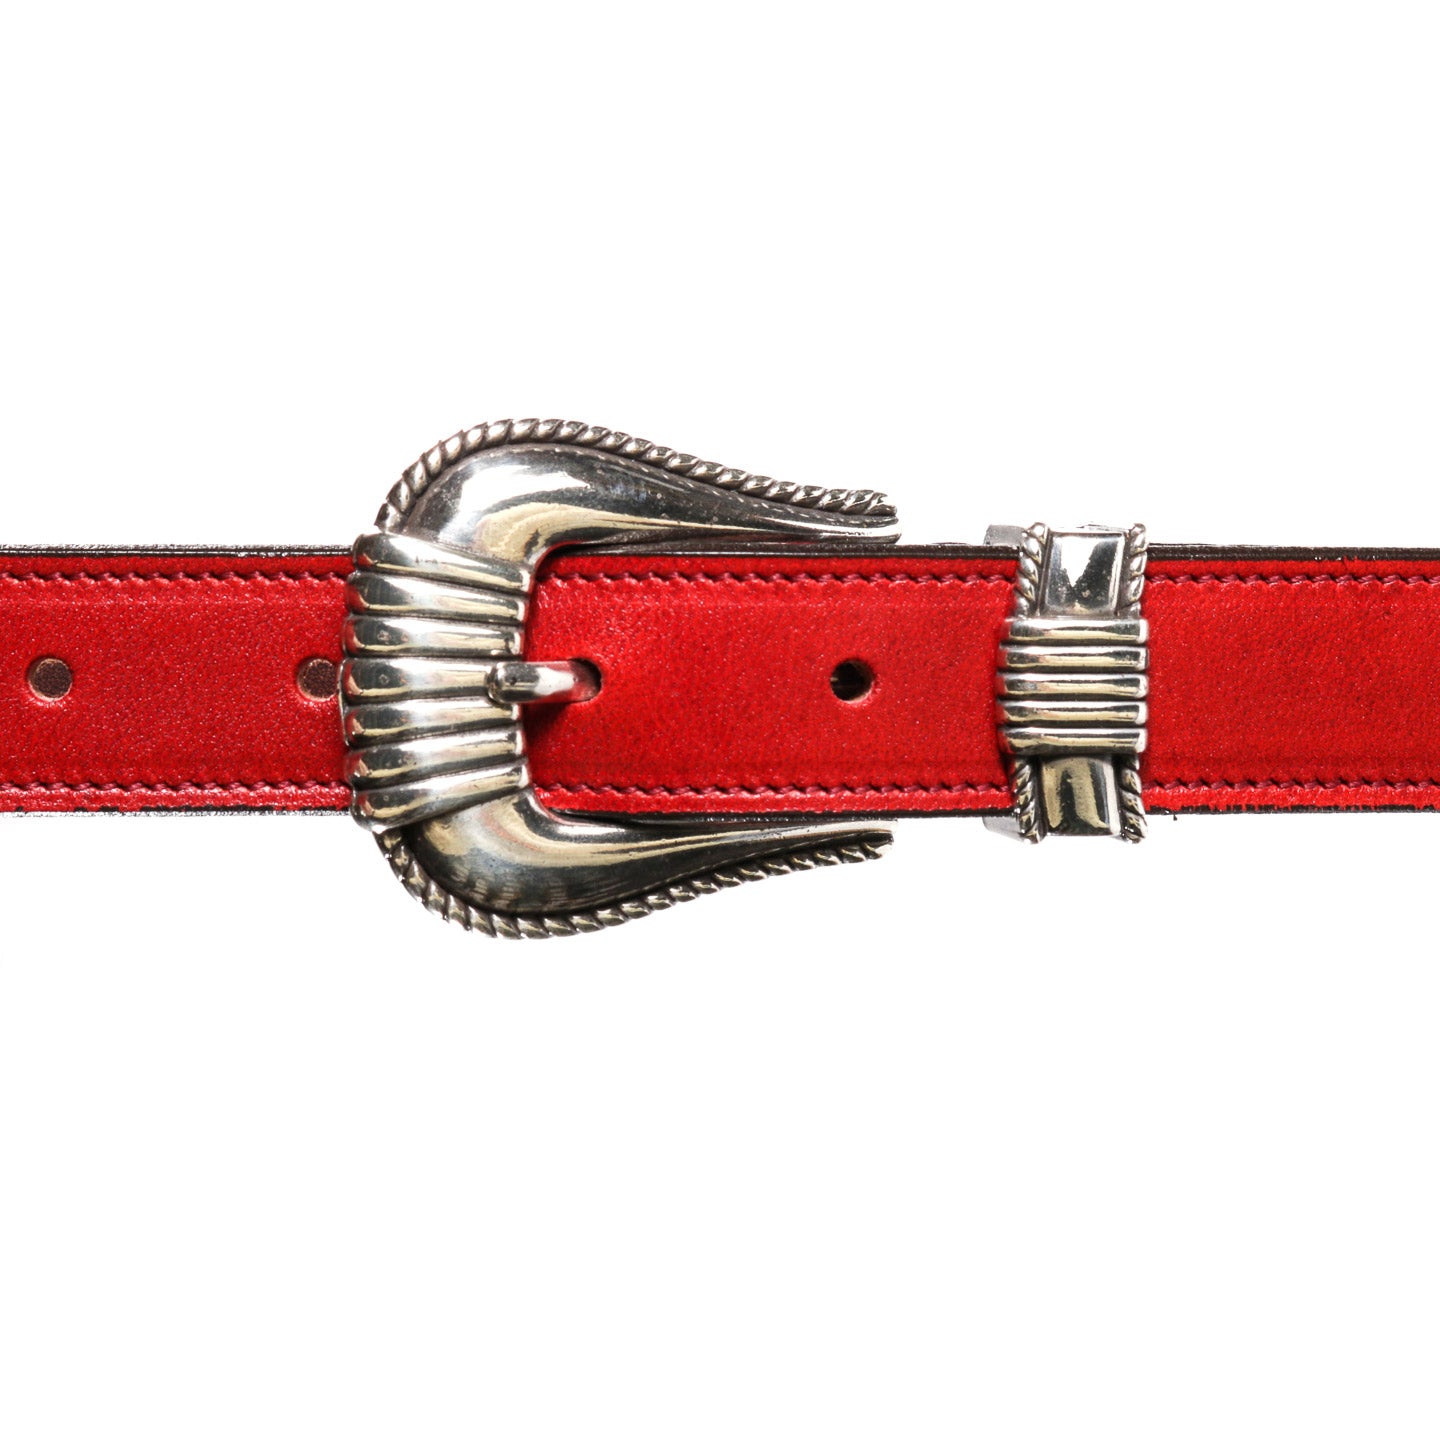 MONITALY EXTENDED 1" CREASED BELT WITH SILVER SET HORWEEN RED